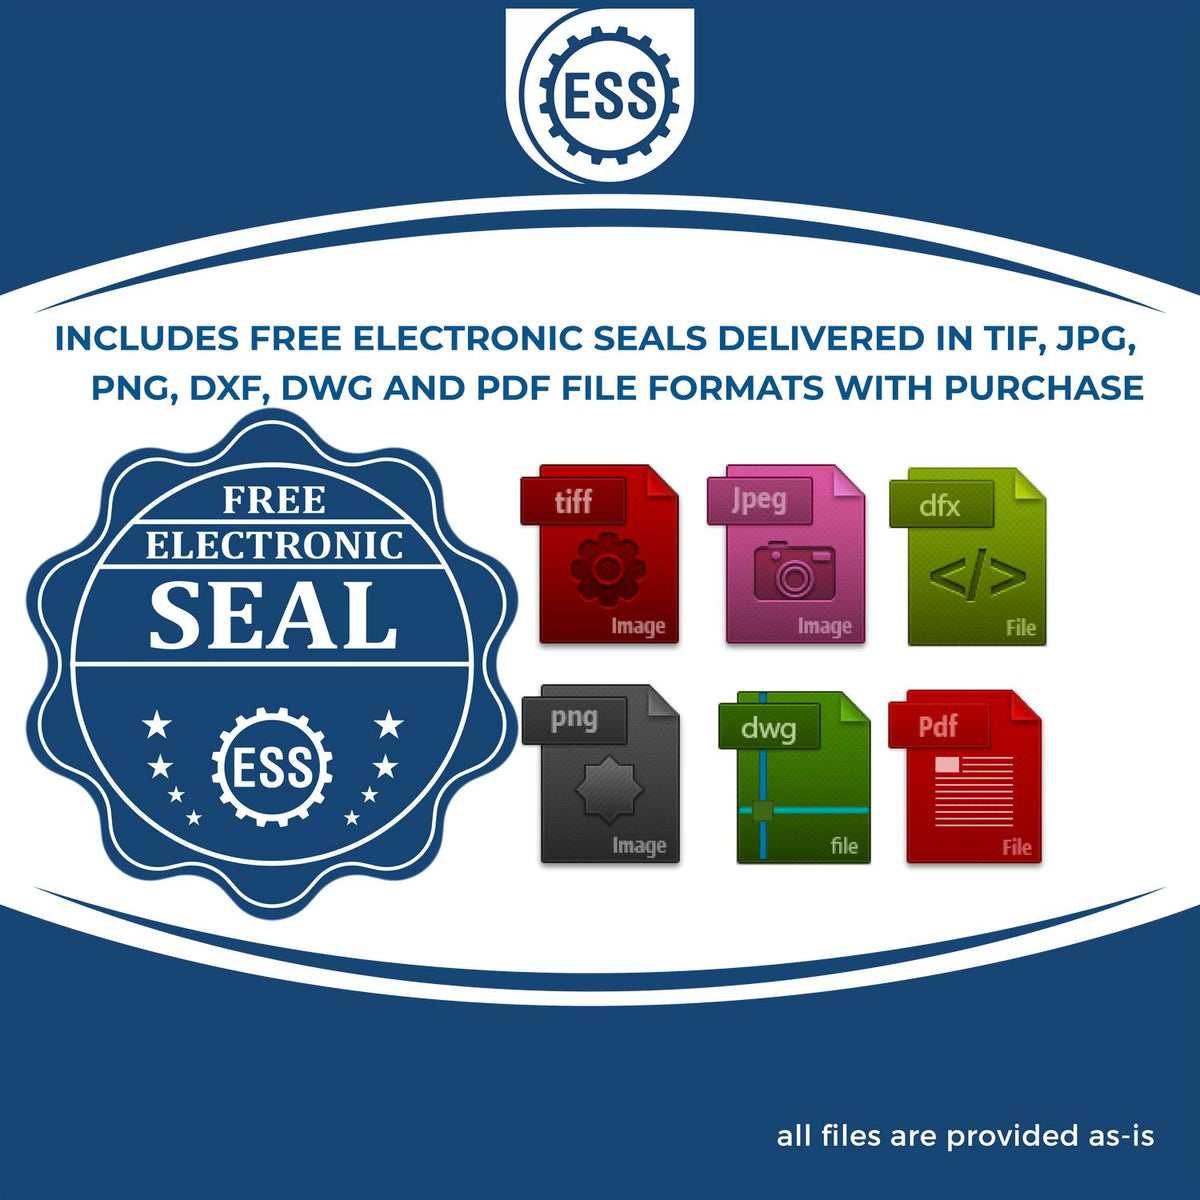 An infographic for the free electronic seal for the Wooden Handle Pennsylvania Rectangular Notary Public Stamp illustrating the different file type icons such as DXF, DWG, TIF, JPG and PNG.